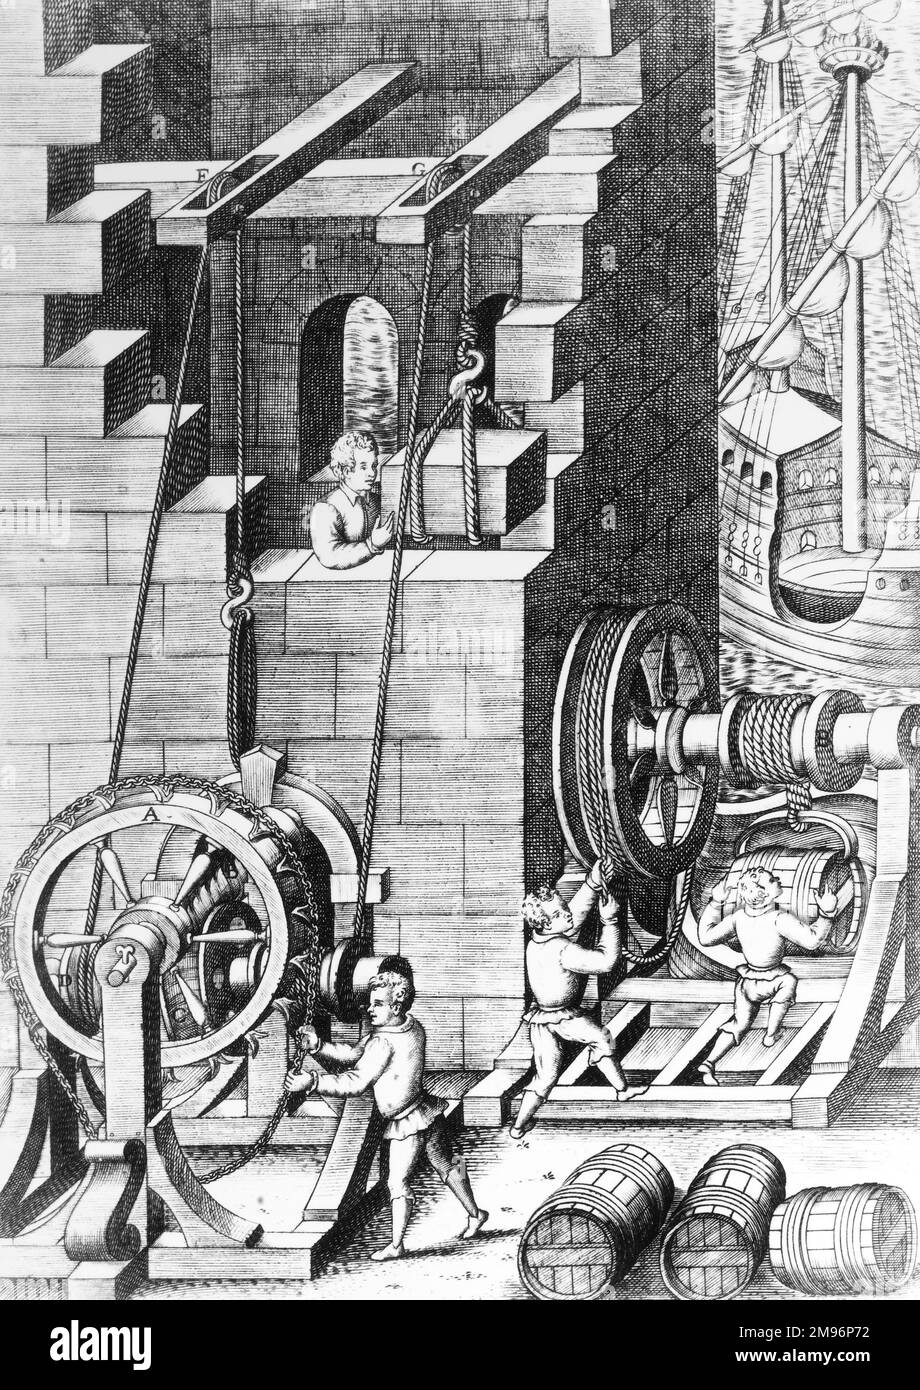 An engraving of a 16th century european construction technique using a pully system. Stock Photo